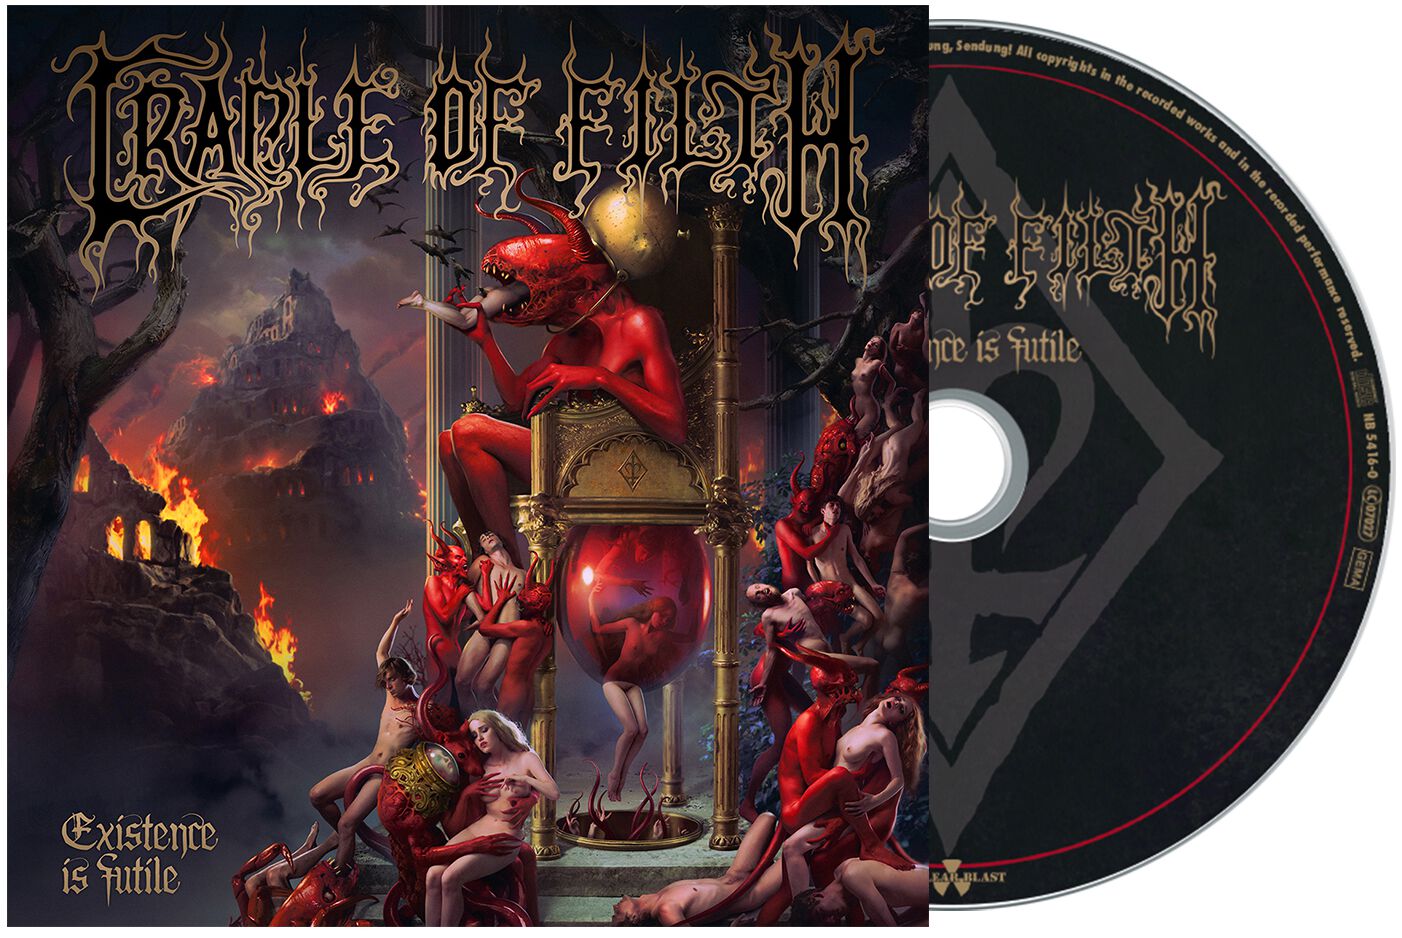 Image of Cradle Of Filth Existence is futile CD Standard